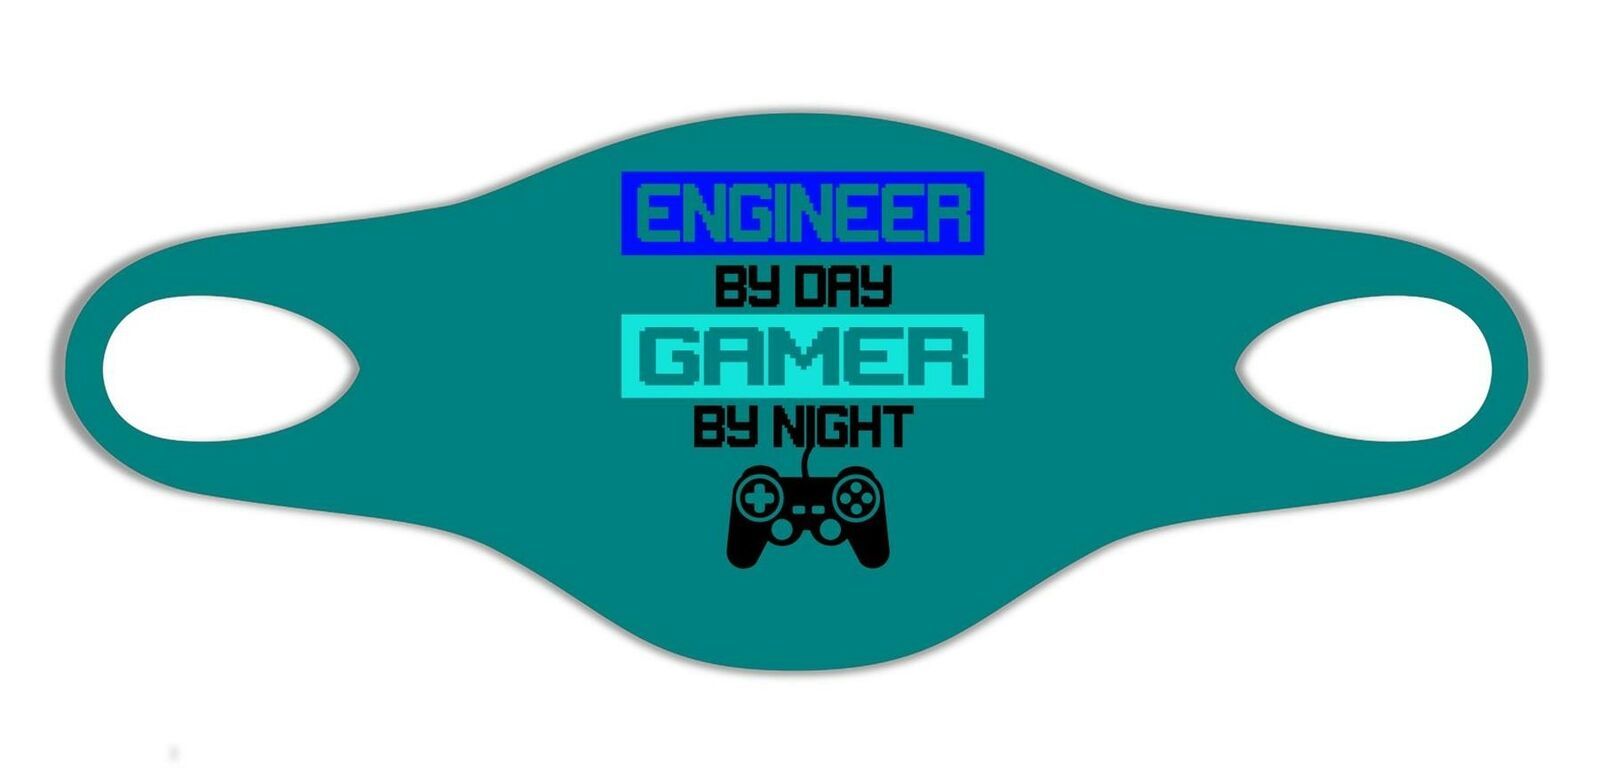 Gamer By Day And Night Born Gamer Protective Wash soft Face Mask